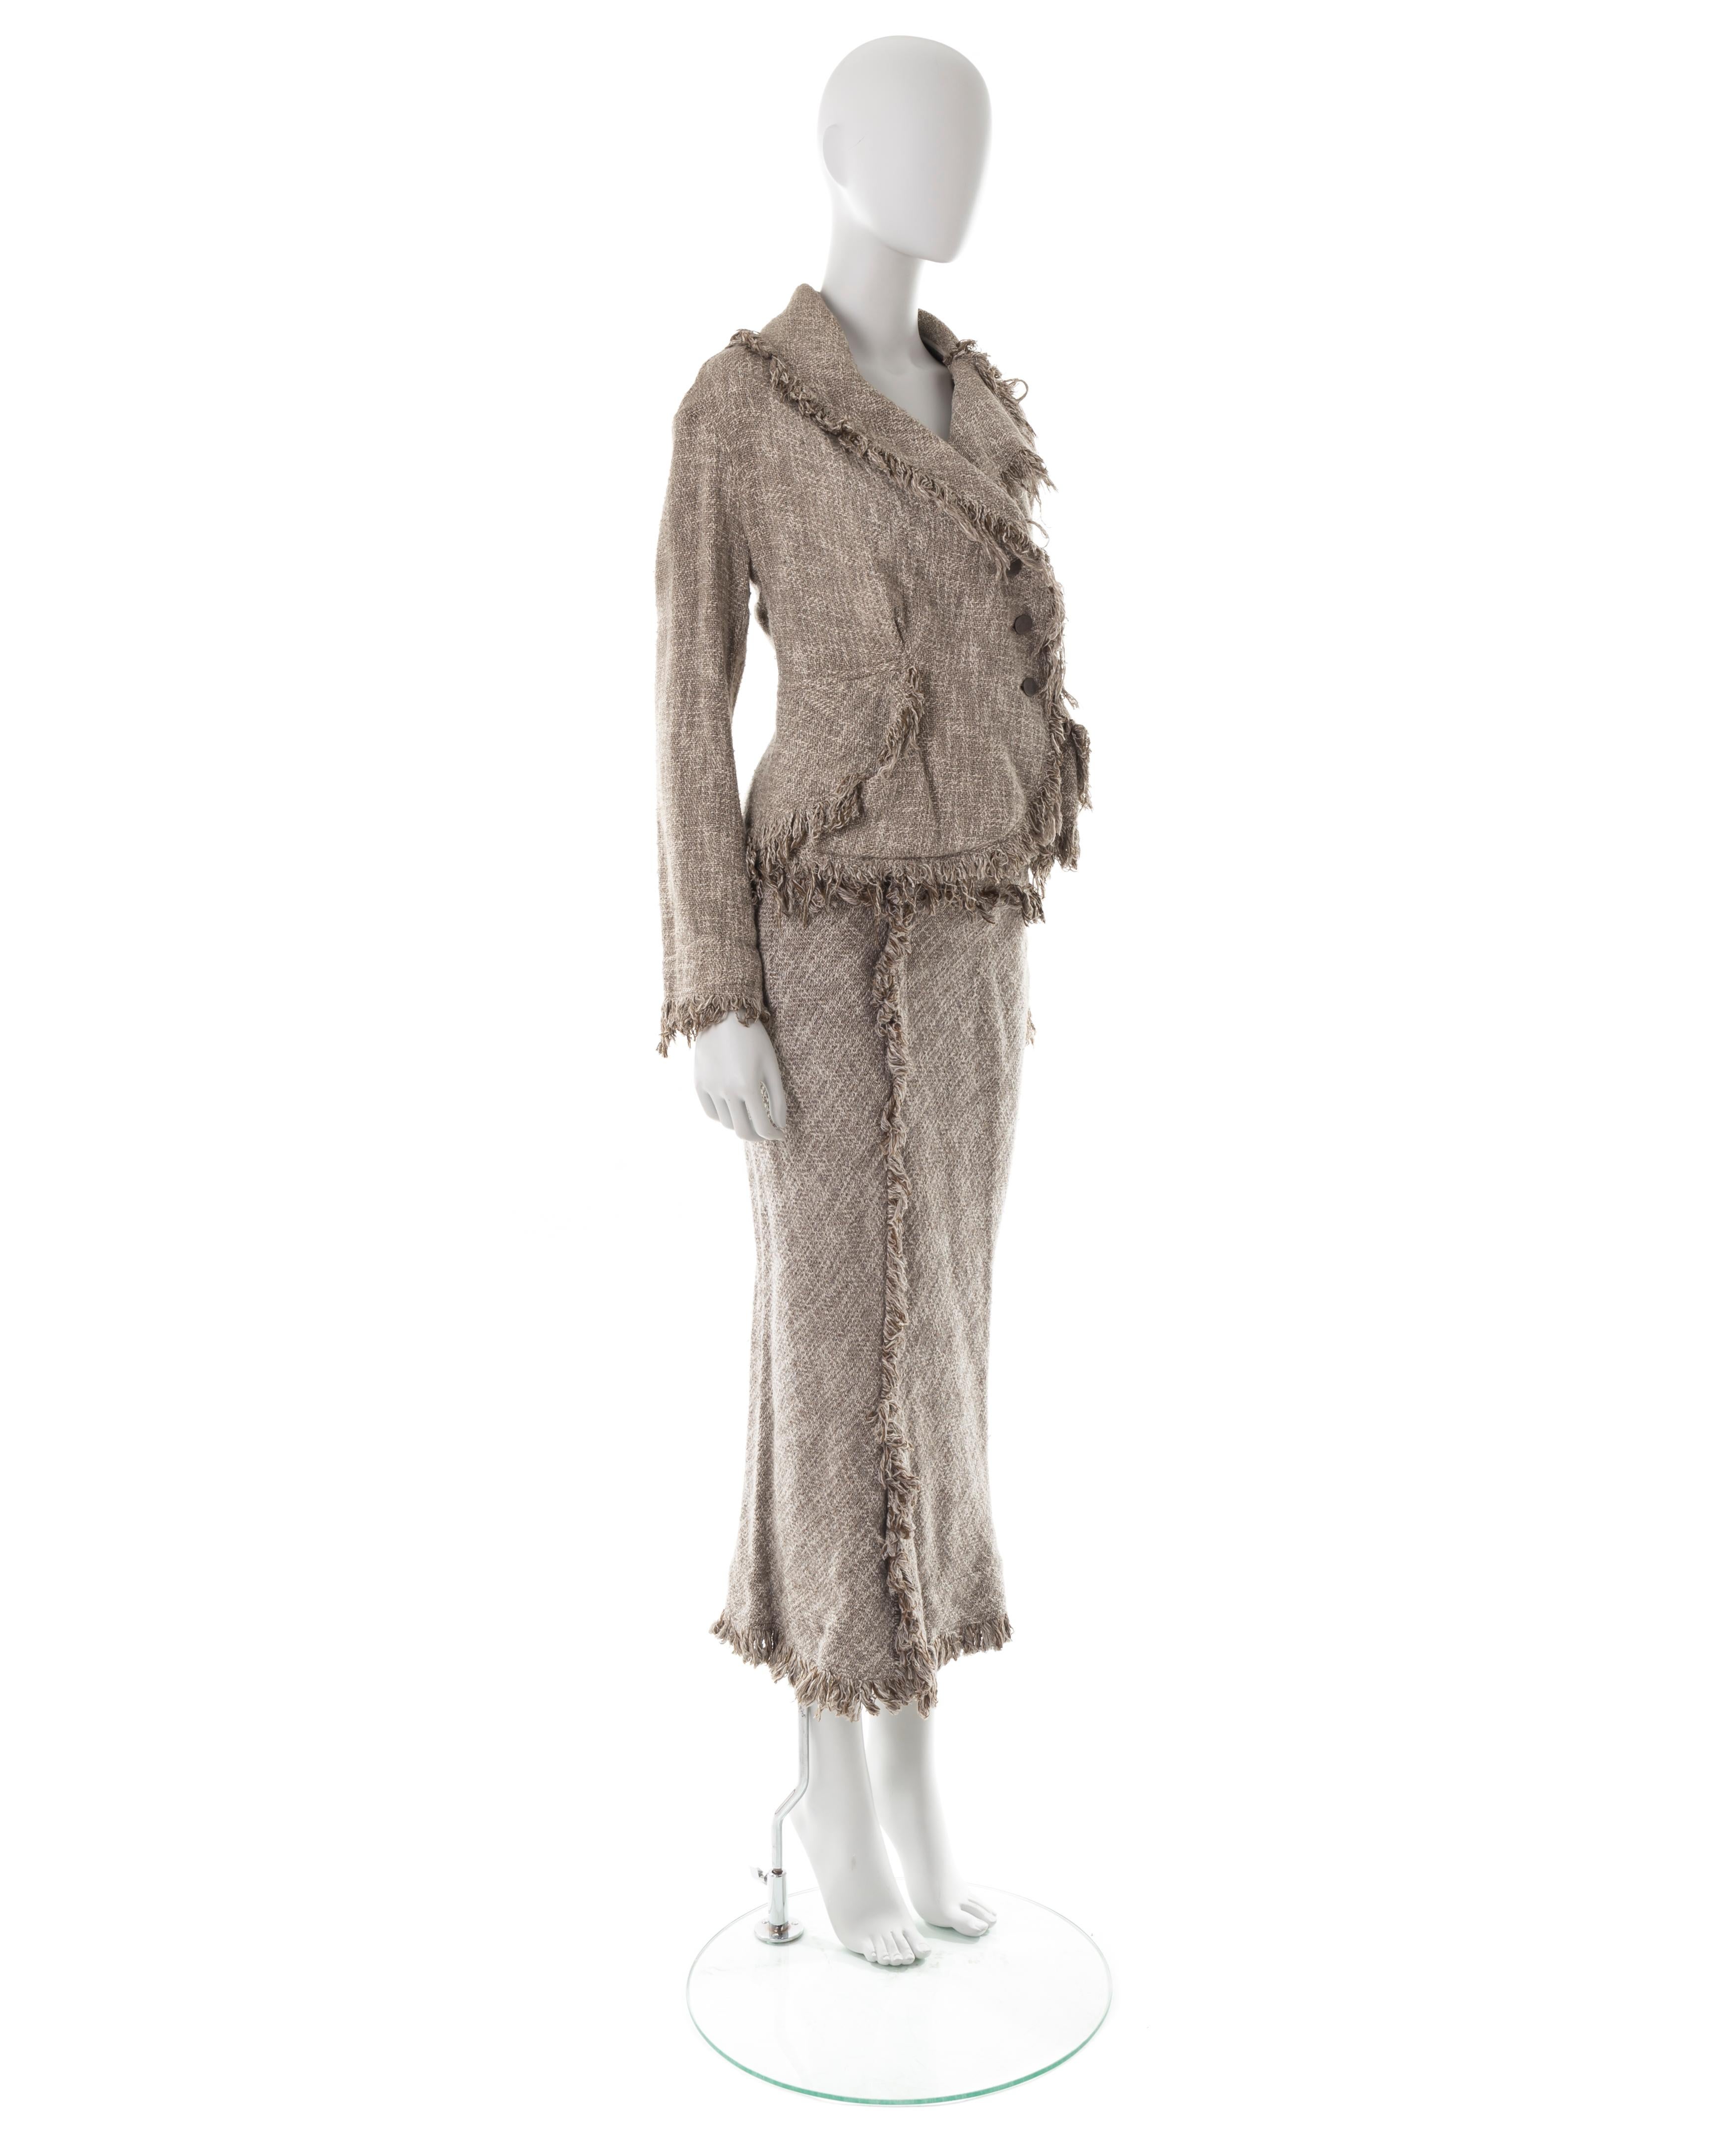 Vivienne Westwood S/S 1997 grey asymmetric frayed wool jacket and skirt suit In New Condition For Sale In Rome, IT